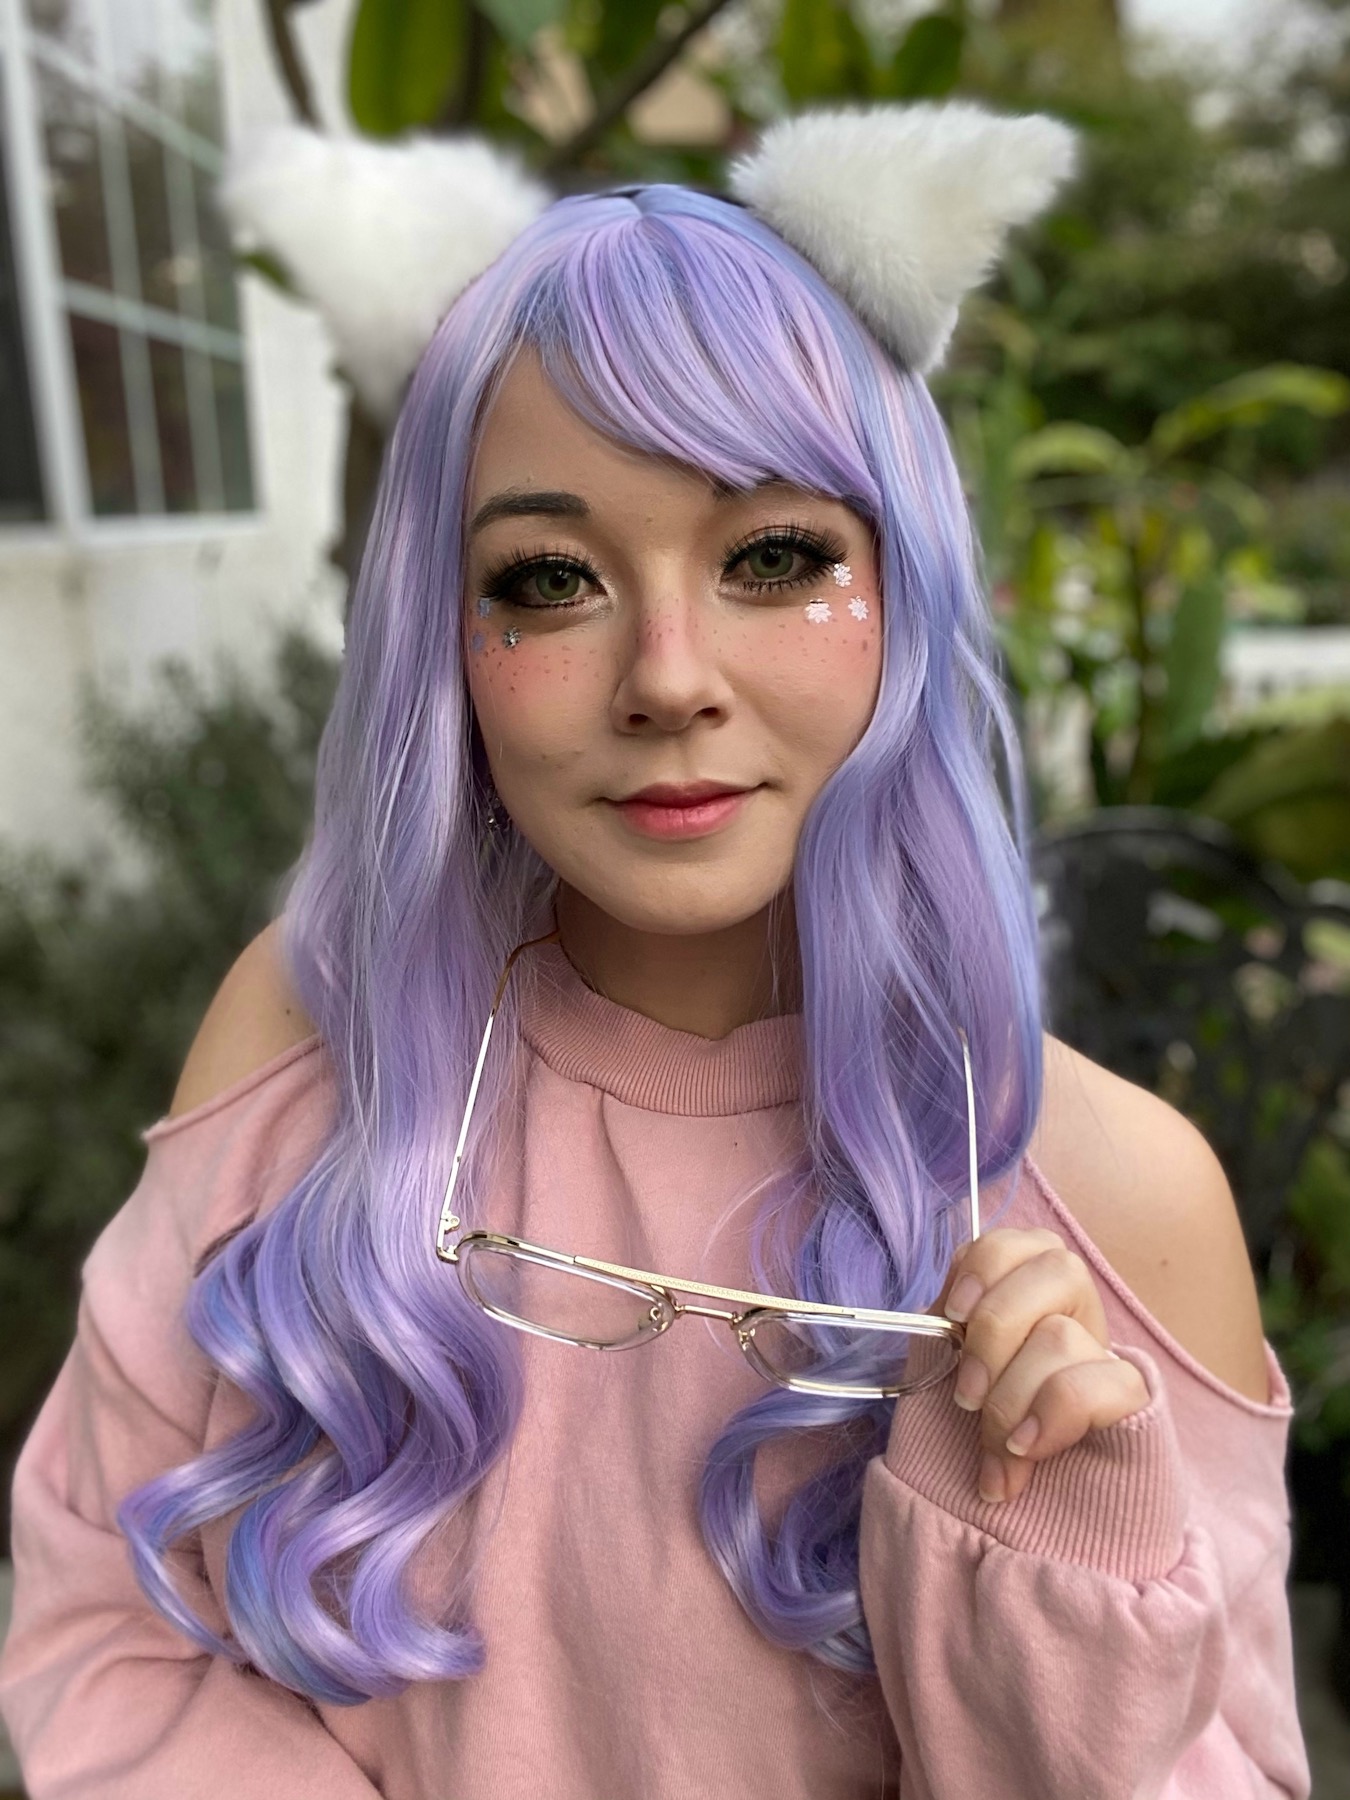 Lavender Lolita Wig With E-Girl Inspired Makeup